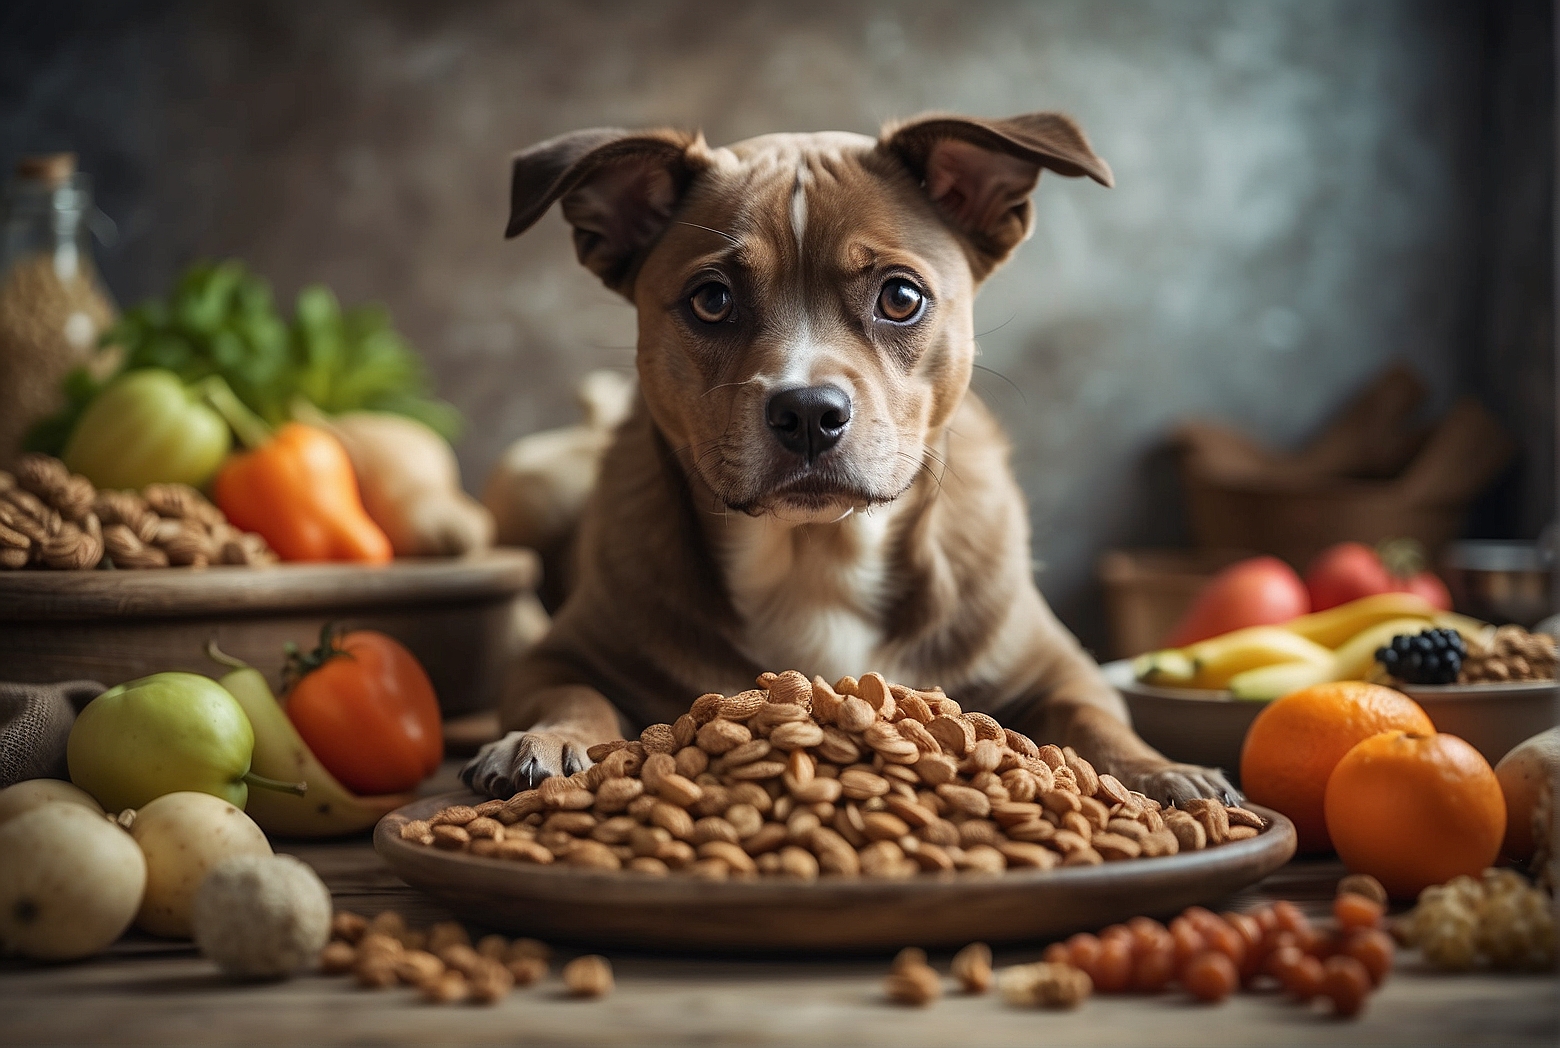 Top 5 Dog Foods for Weight Loss